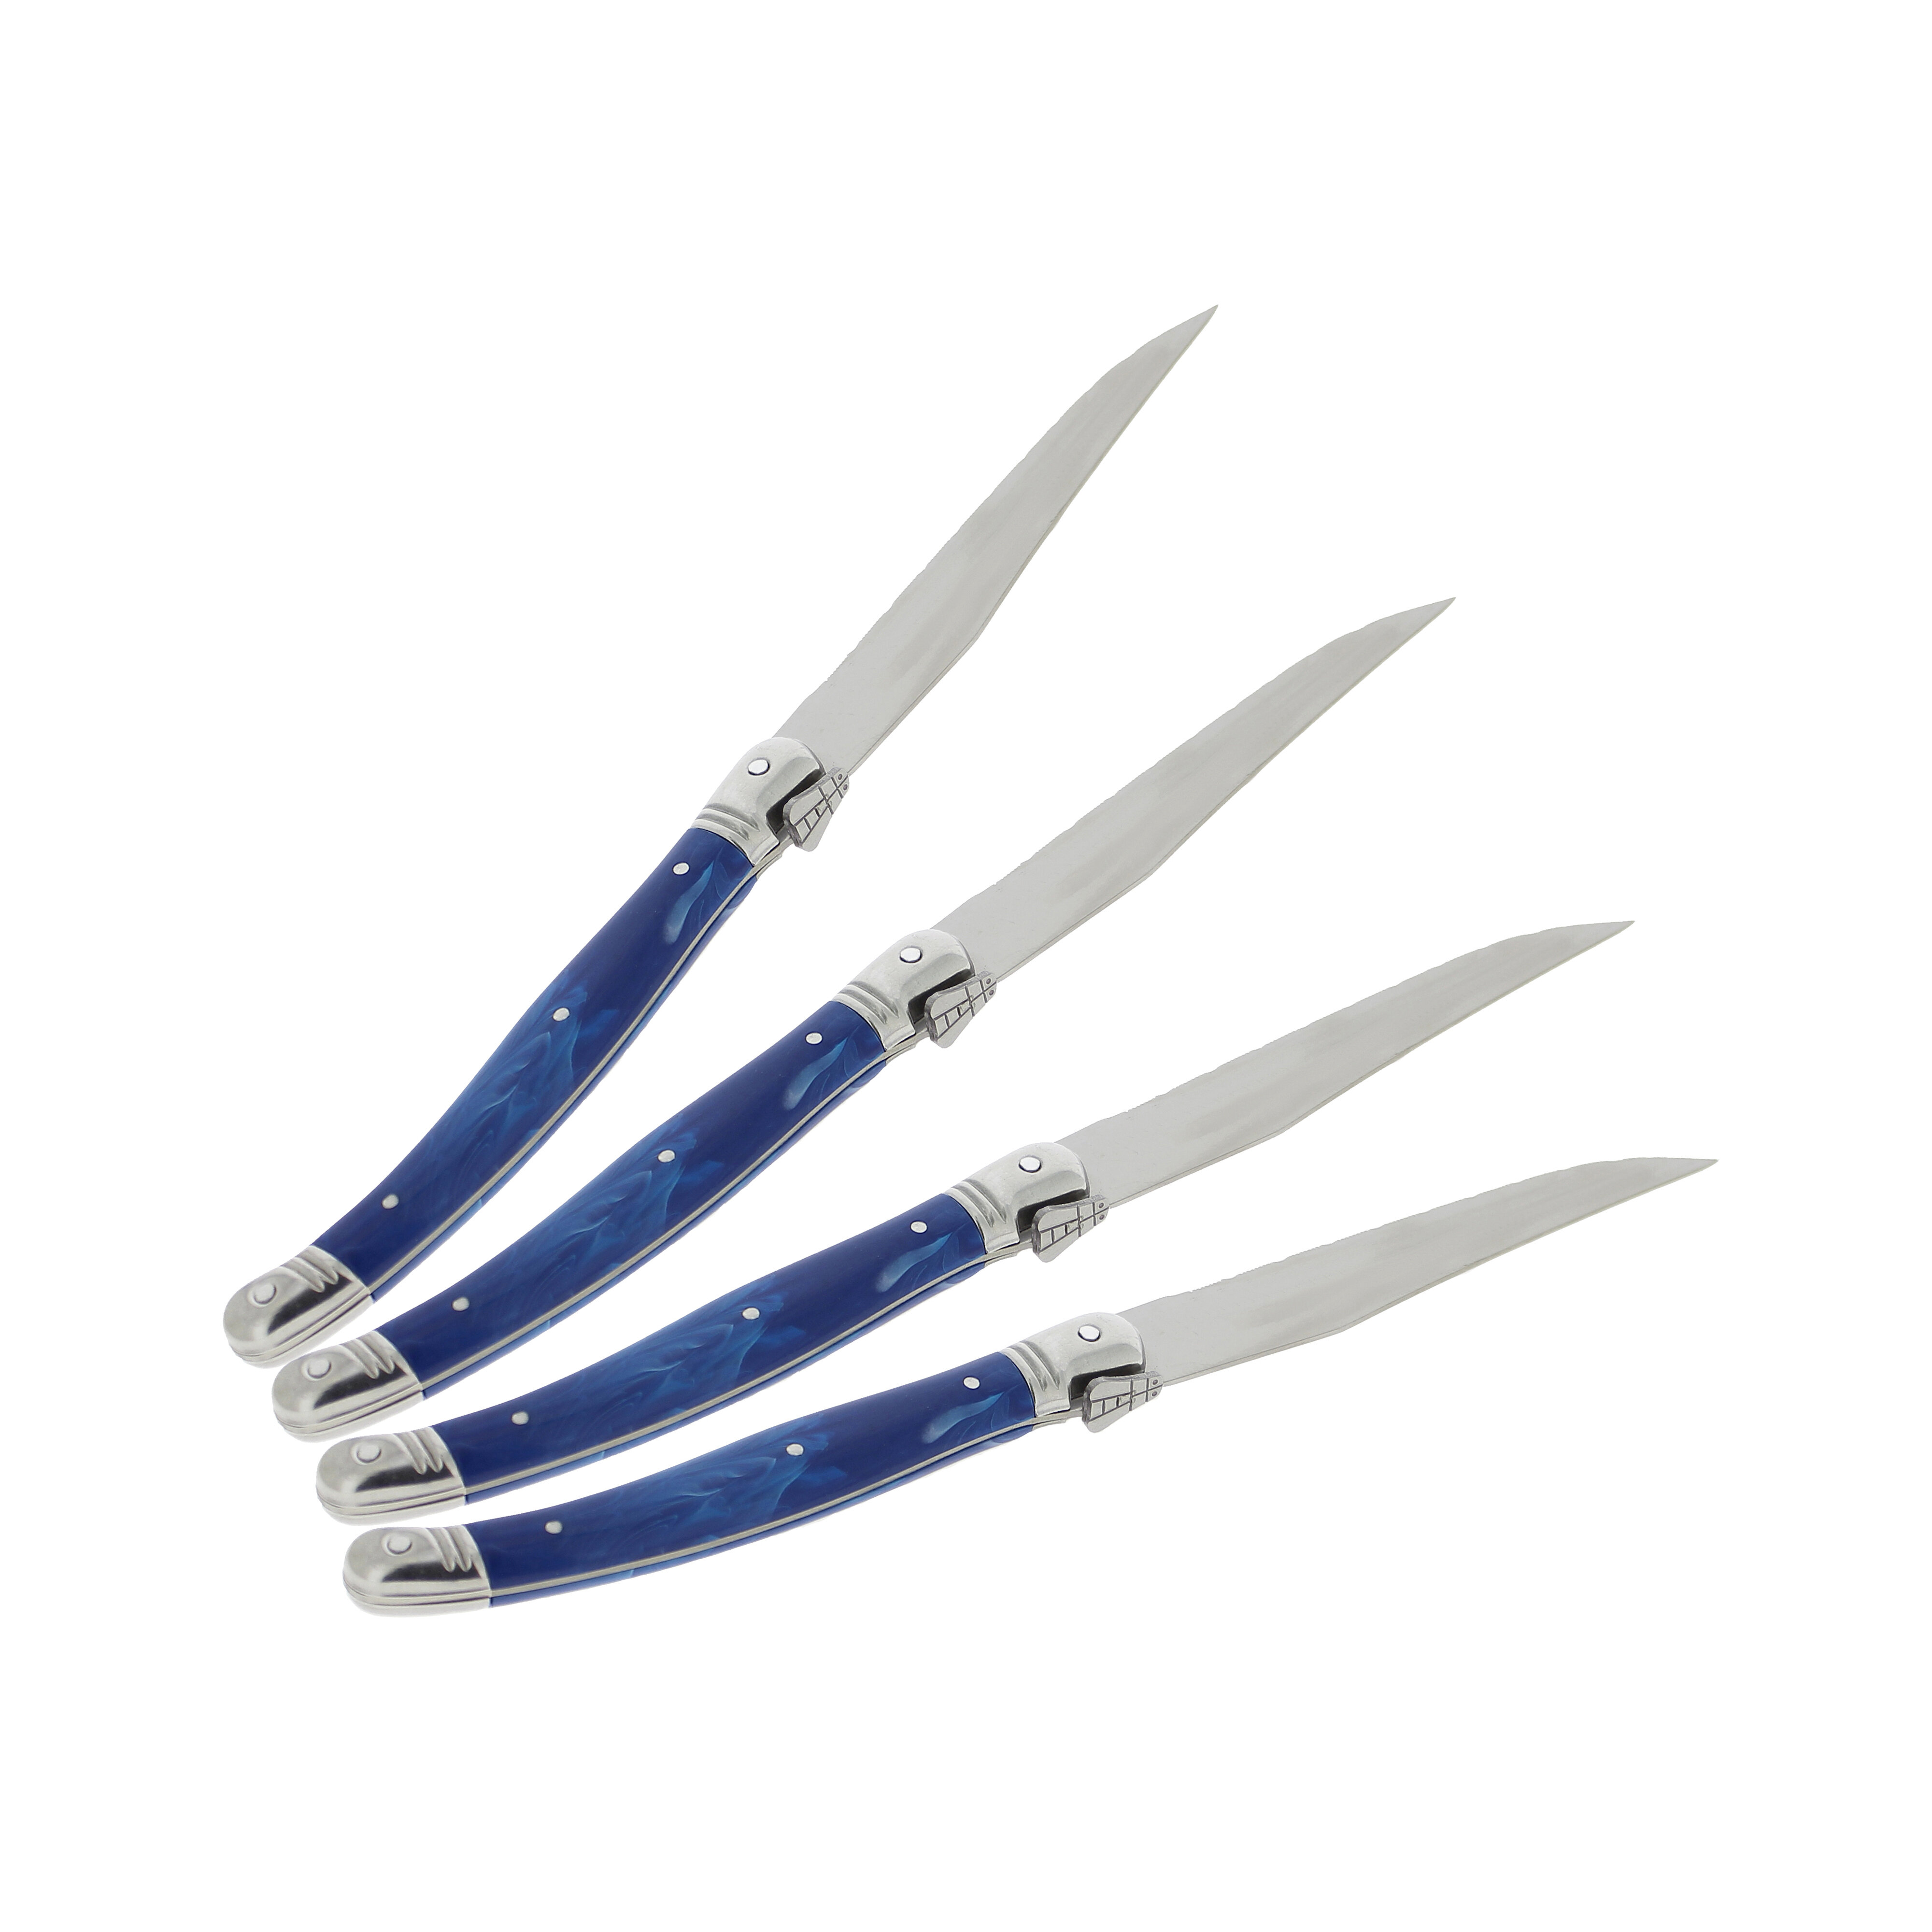 ELEGANCE: Steak Knife 5 [Serrated]  Sabatier Authentic Cutlery forged  Knives imported from France